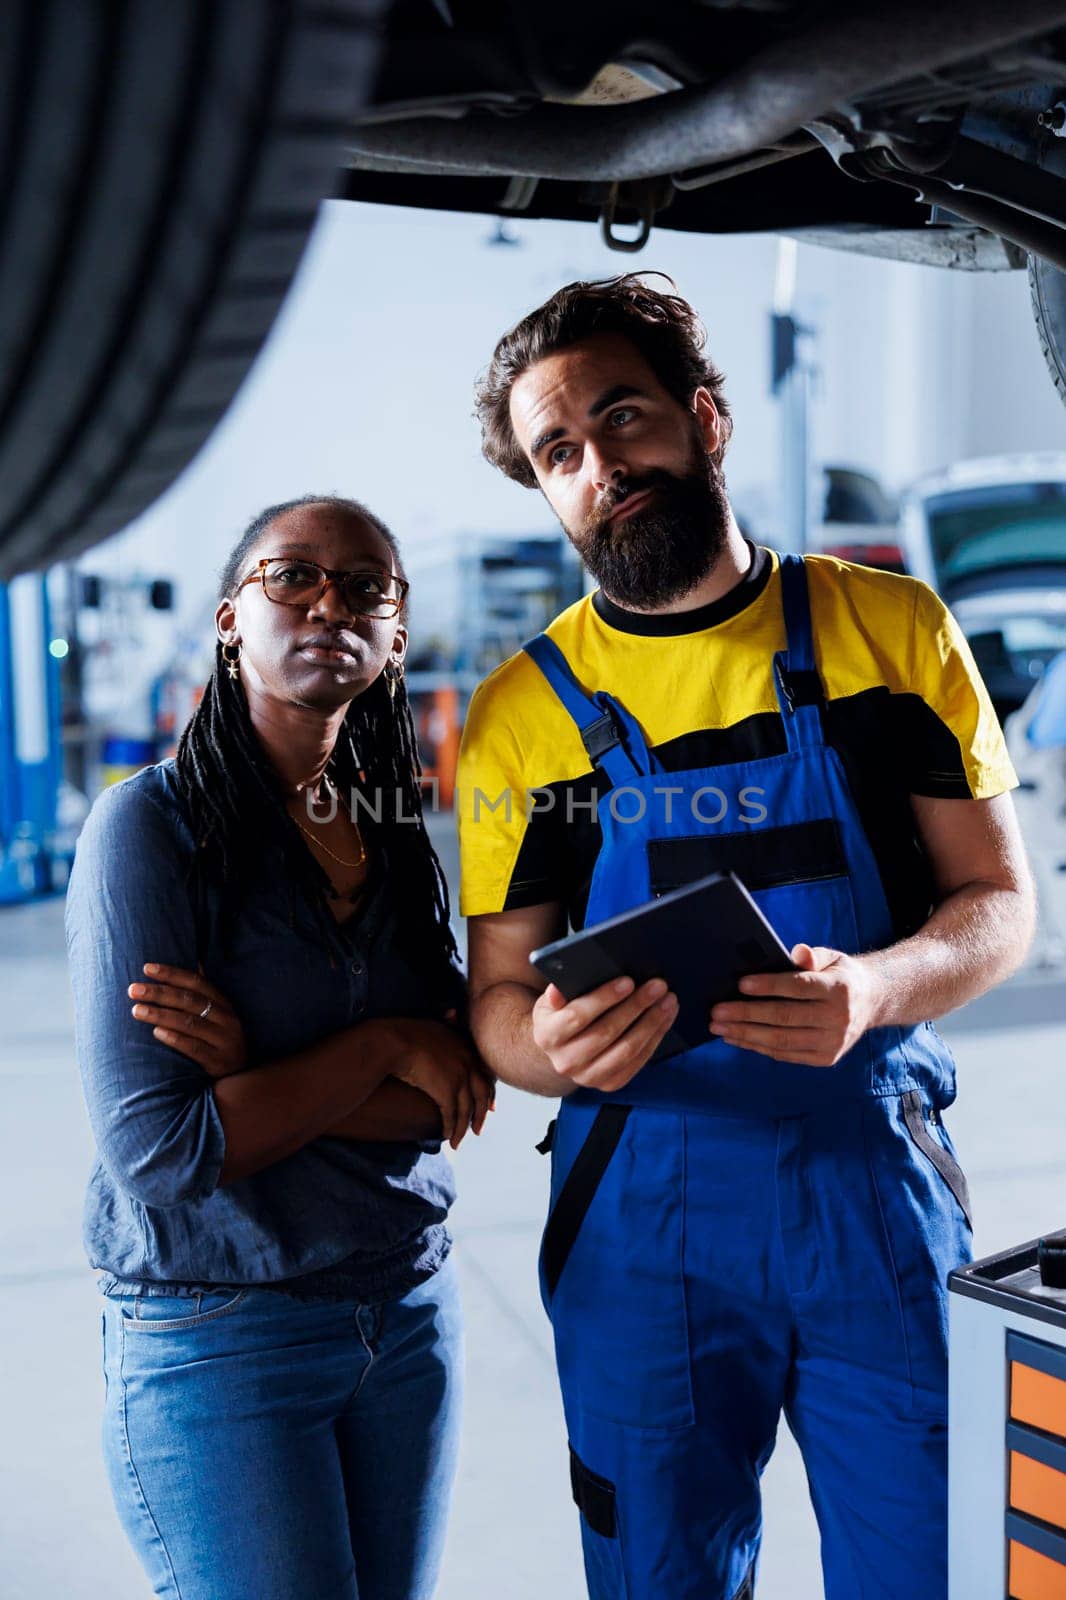 Proficient professional helping customer with car checkup in auto repair shop. Garage employee looking over automobile parts with woman, repairing her busted vehicle wheels during inspection